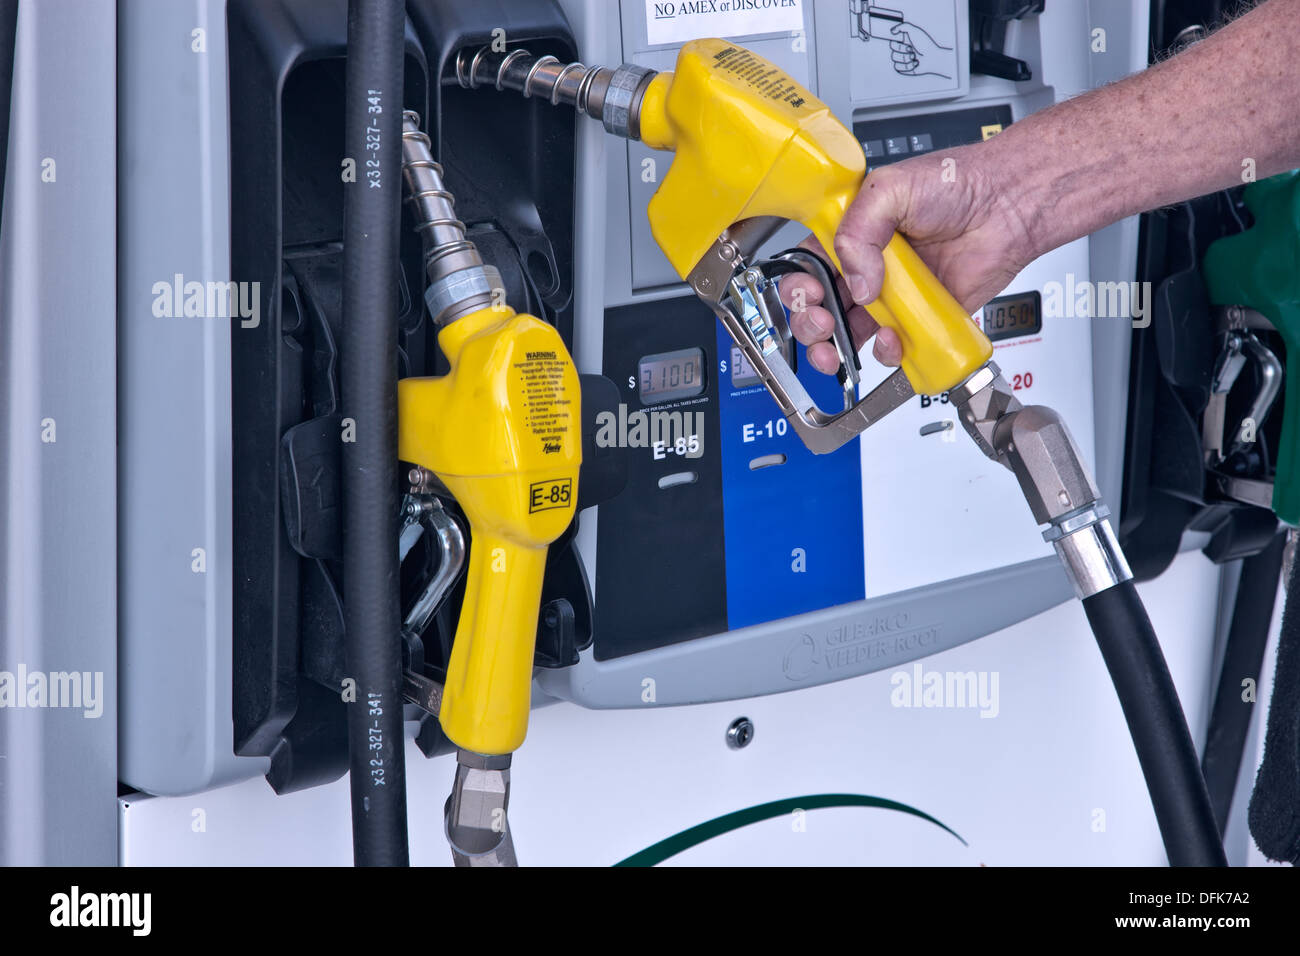 Biofuel pump, hand removing nozzle, service station. Stock Photo